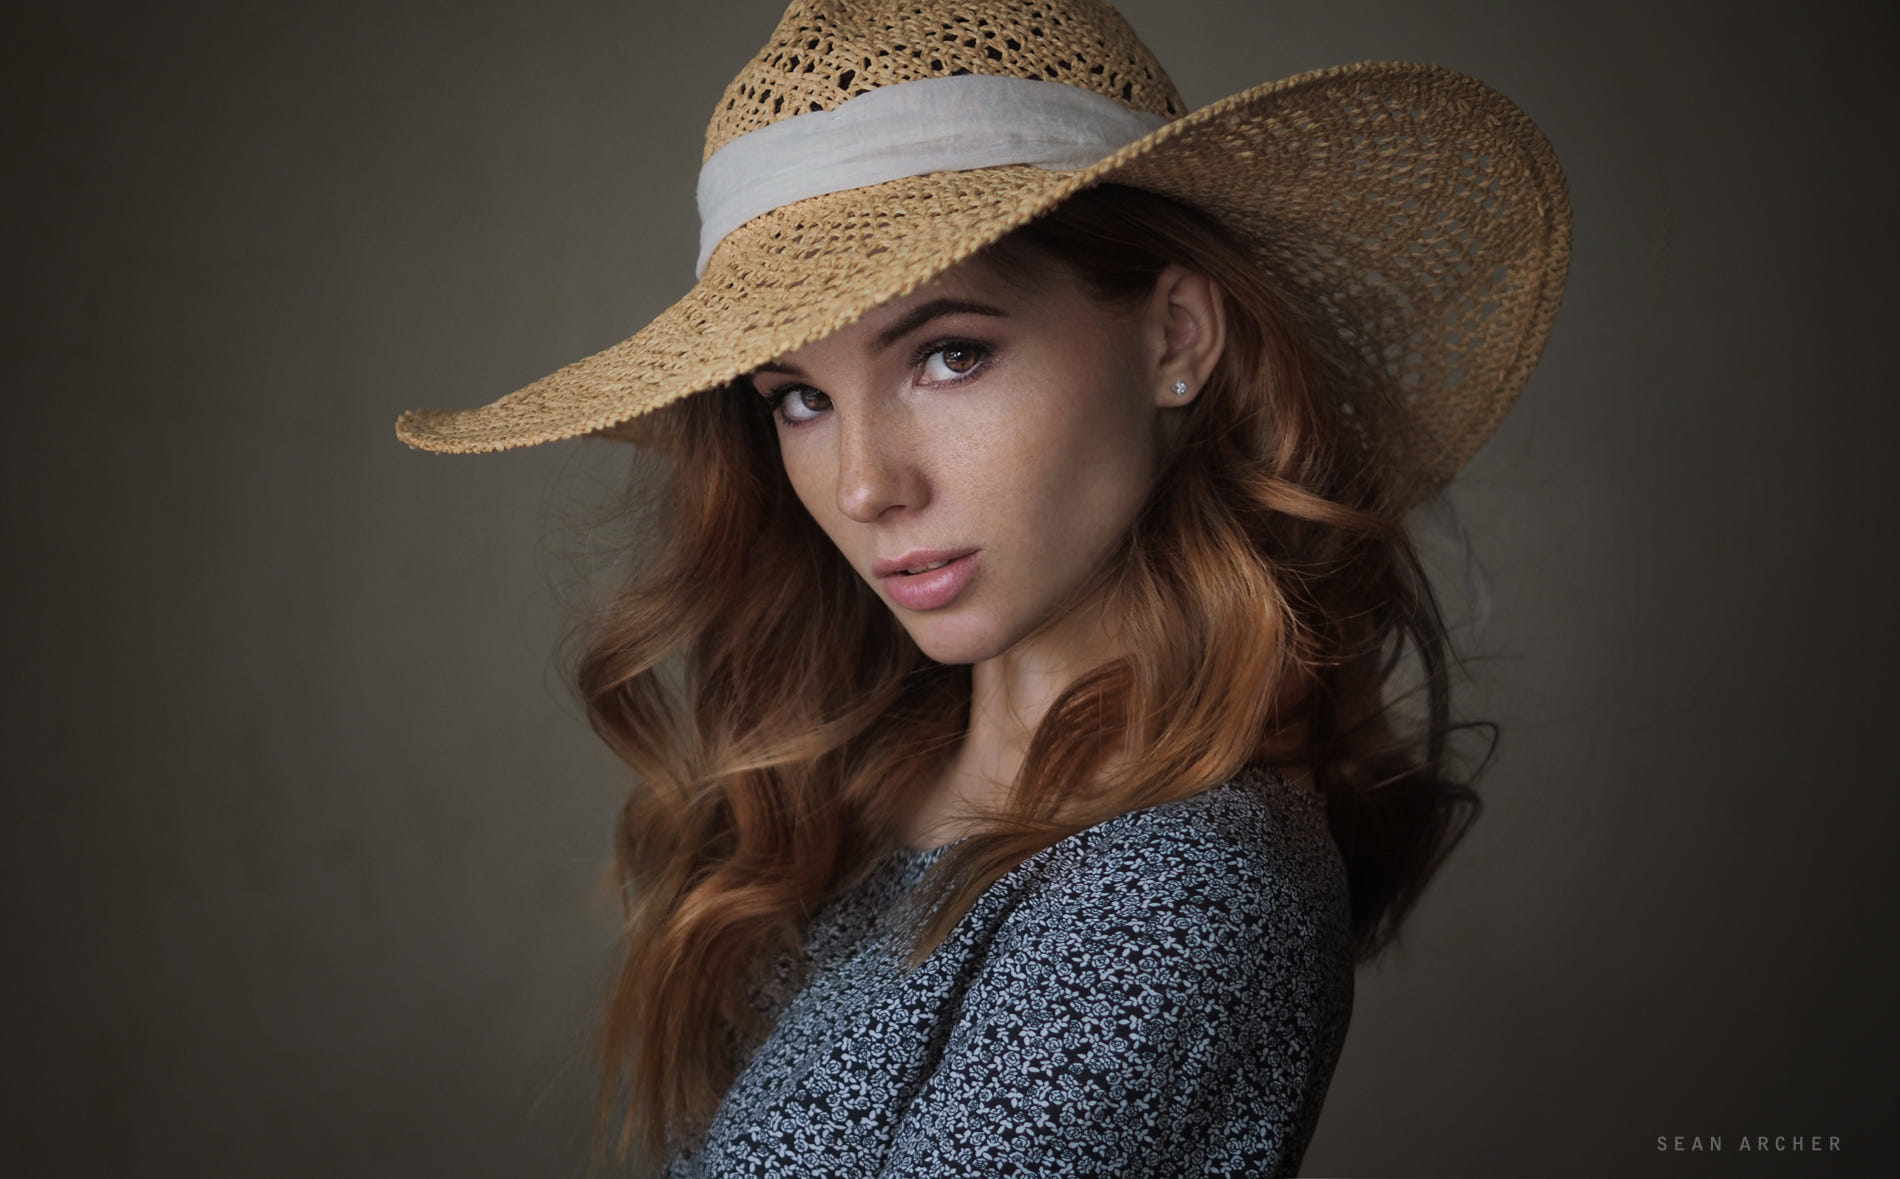 People 1900x1179 women redhead hat simple background face long hair freckles hazel eyes portrait Sean Archer women with hats Anna Fedotova watermarked